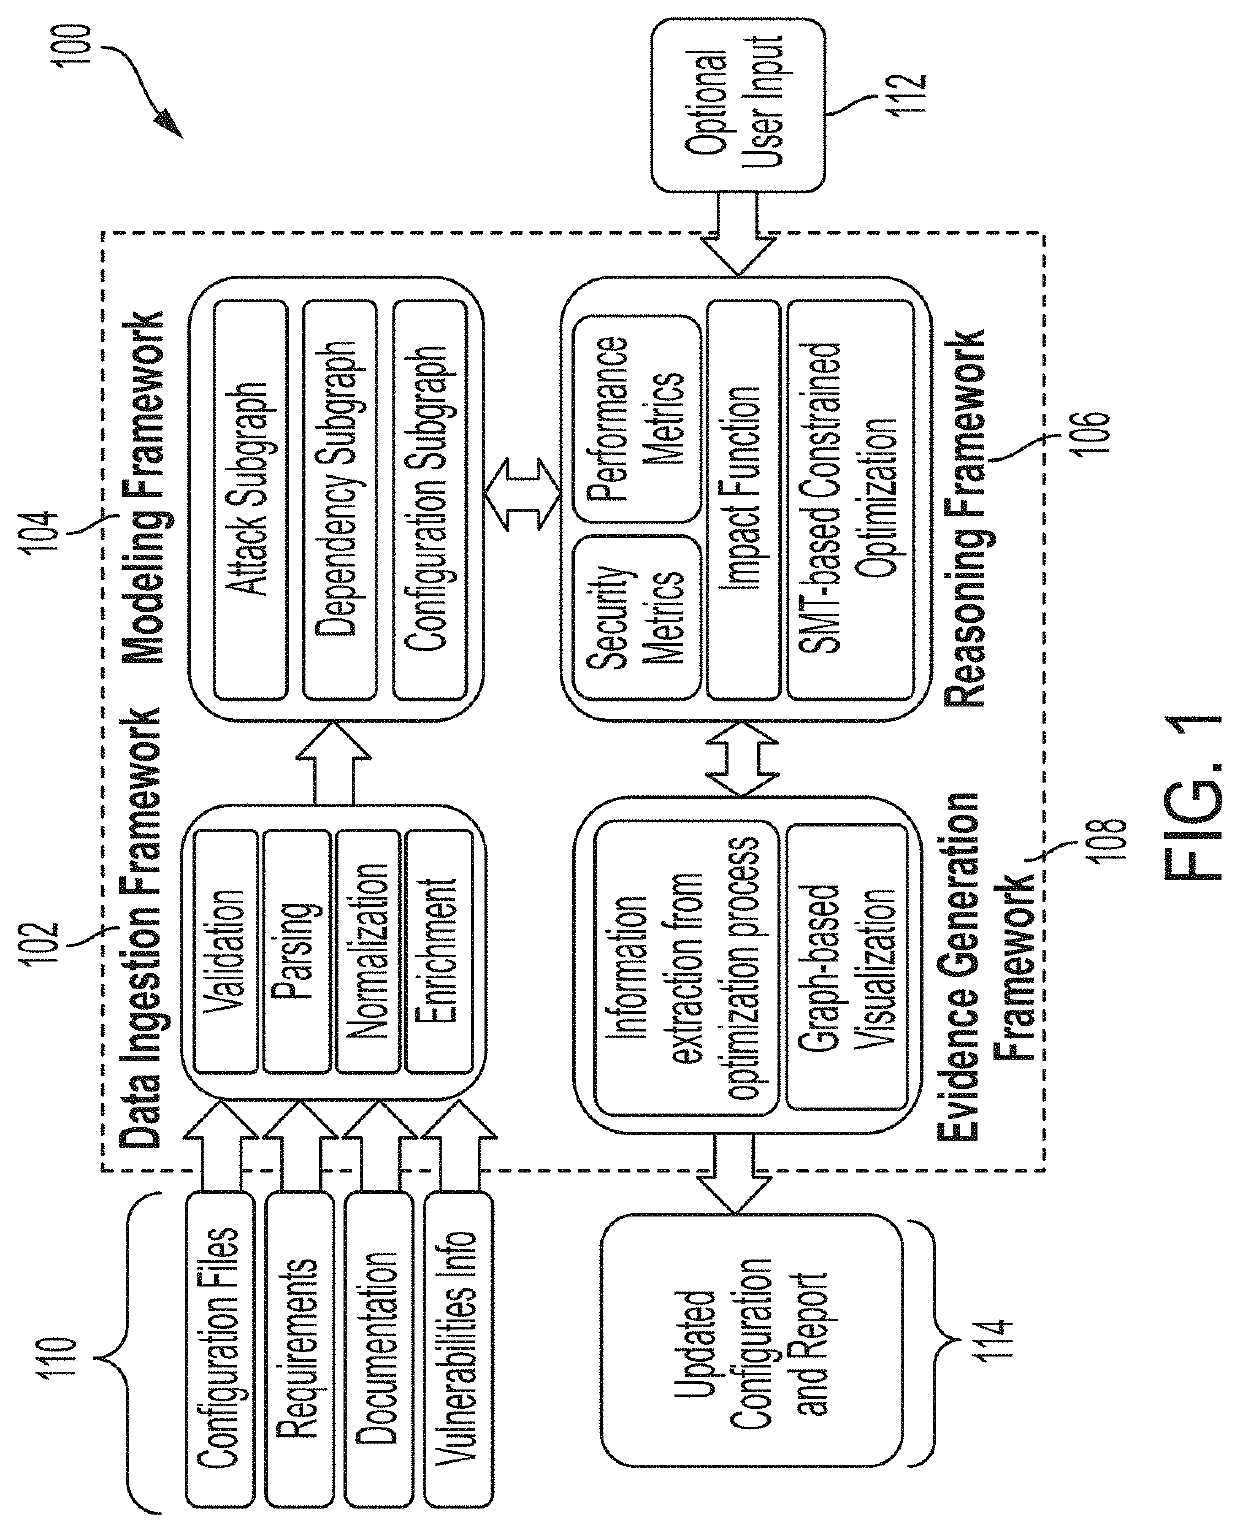 System and method for generating evidence for the superiority of a distributed system configuration